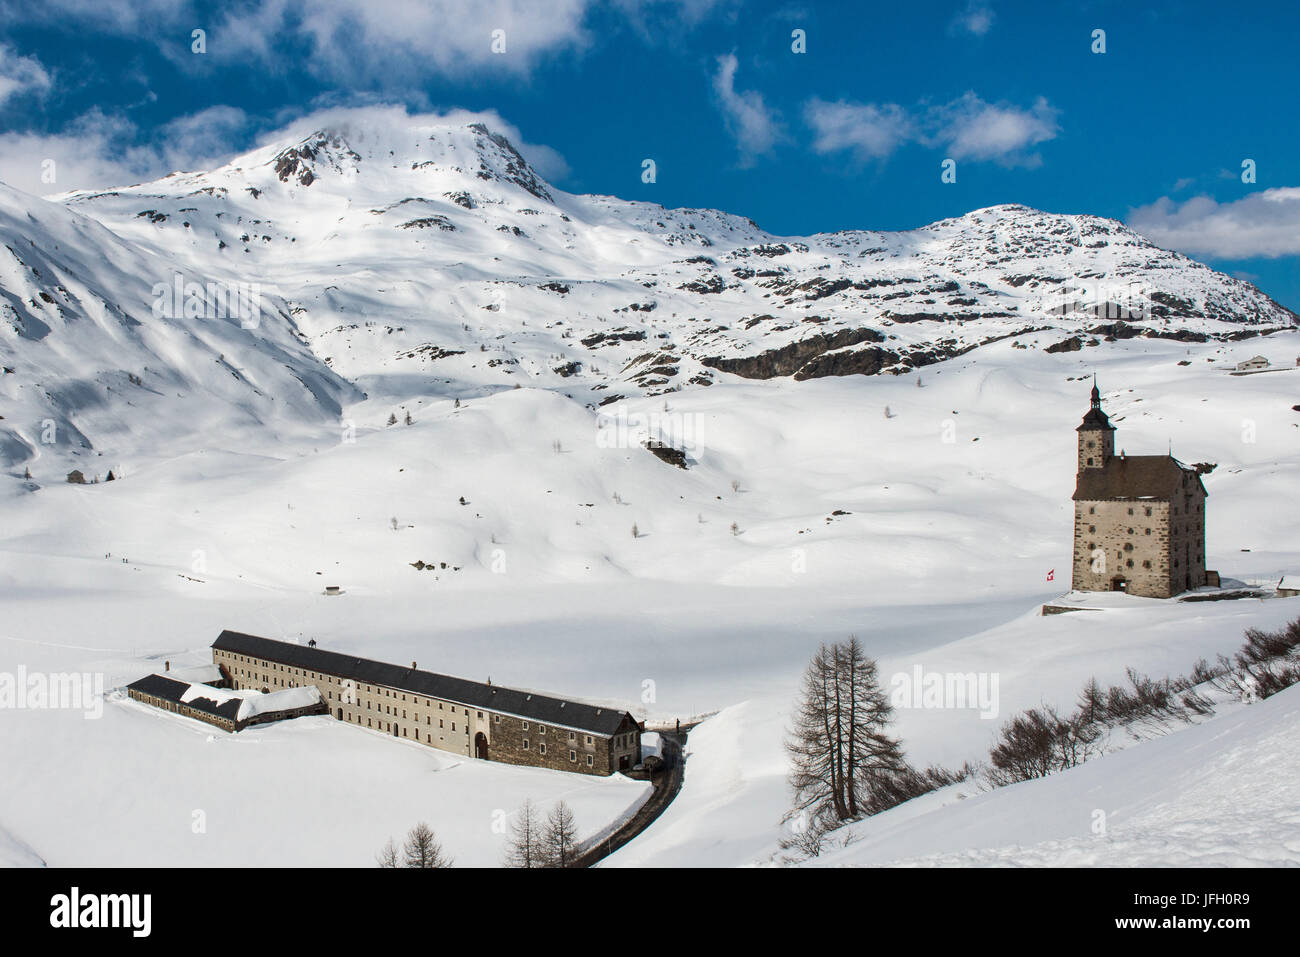 Winter scenery in the Simplonpass with old hospice, Valais, Switzerland Stock Photo